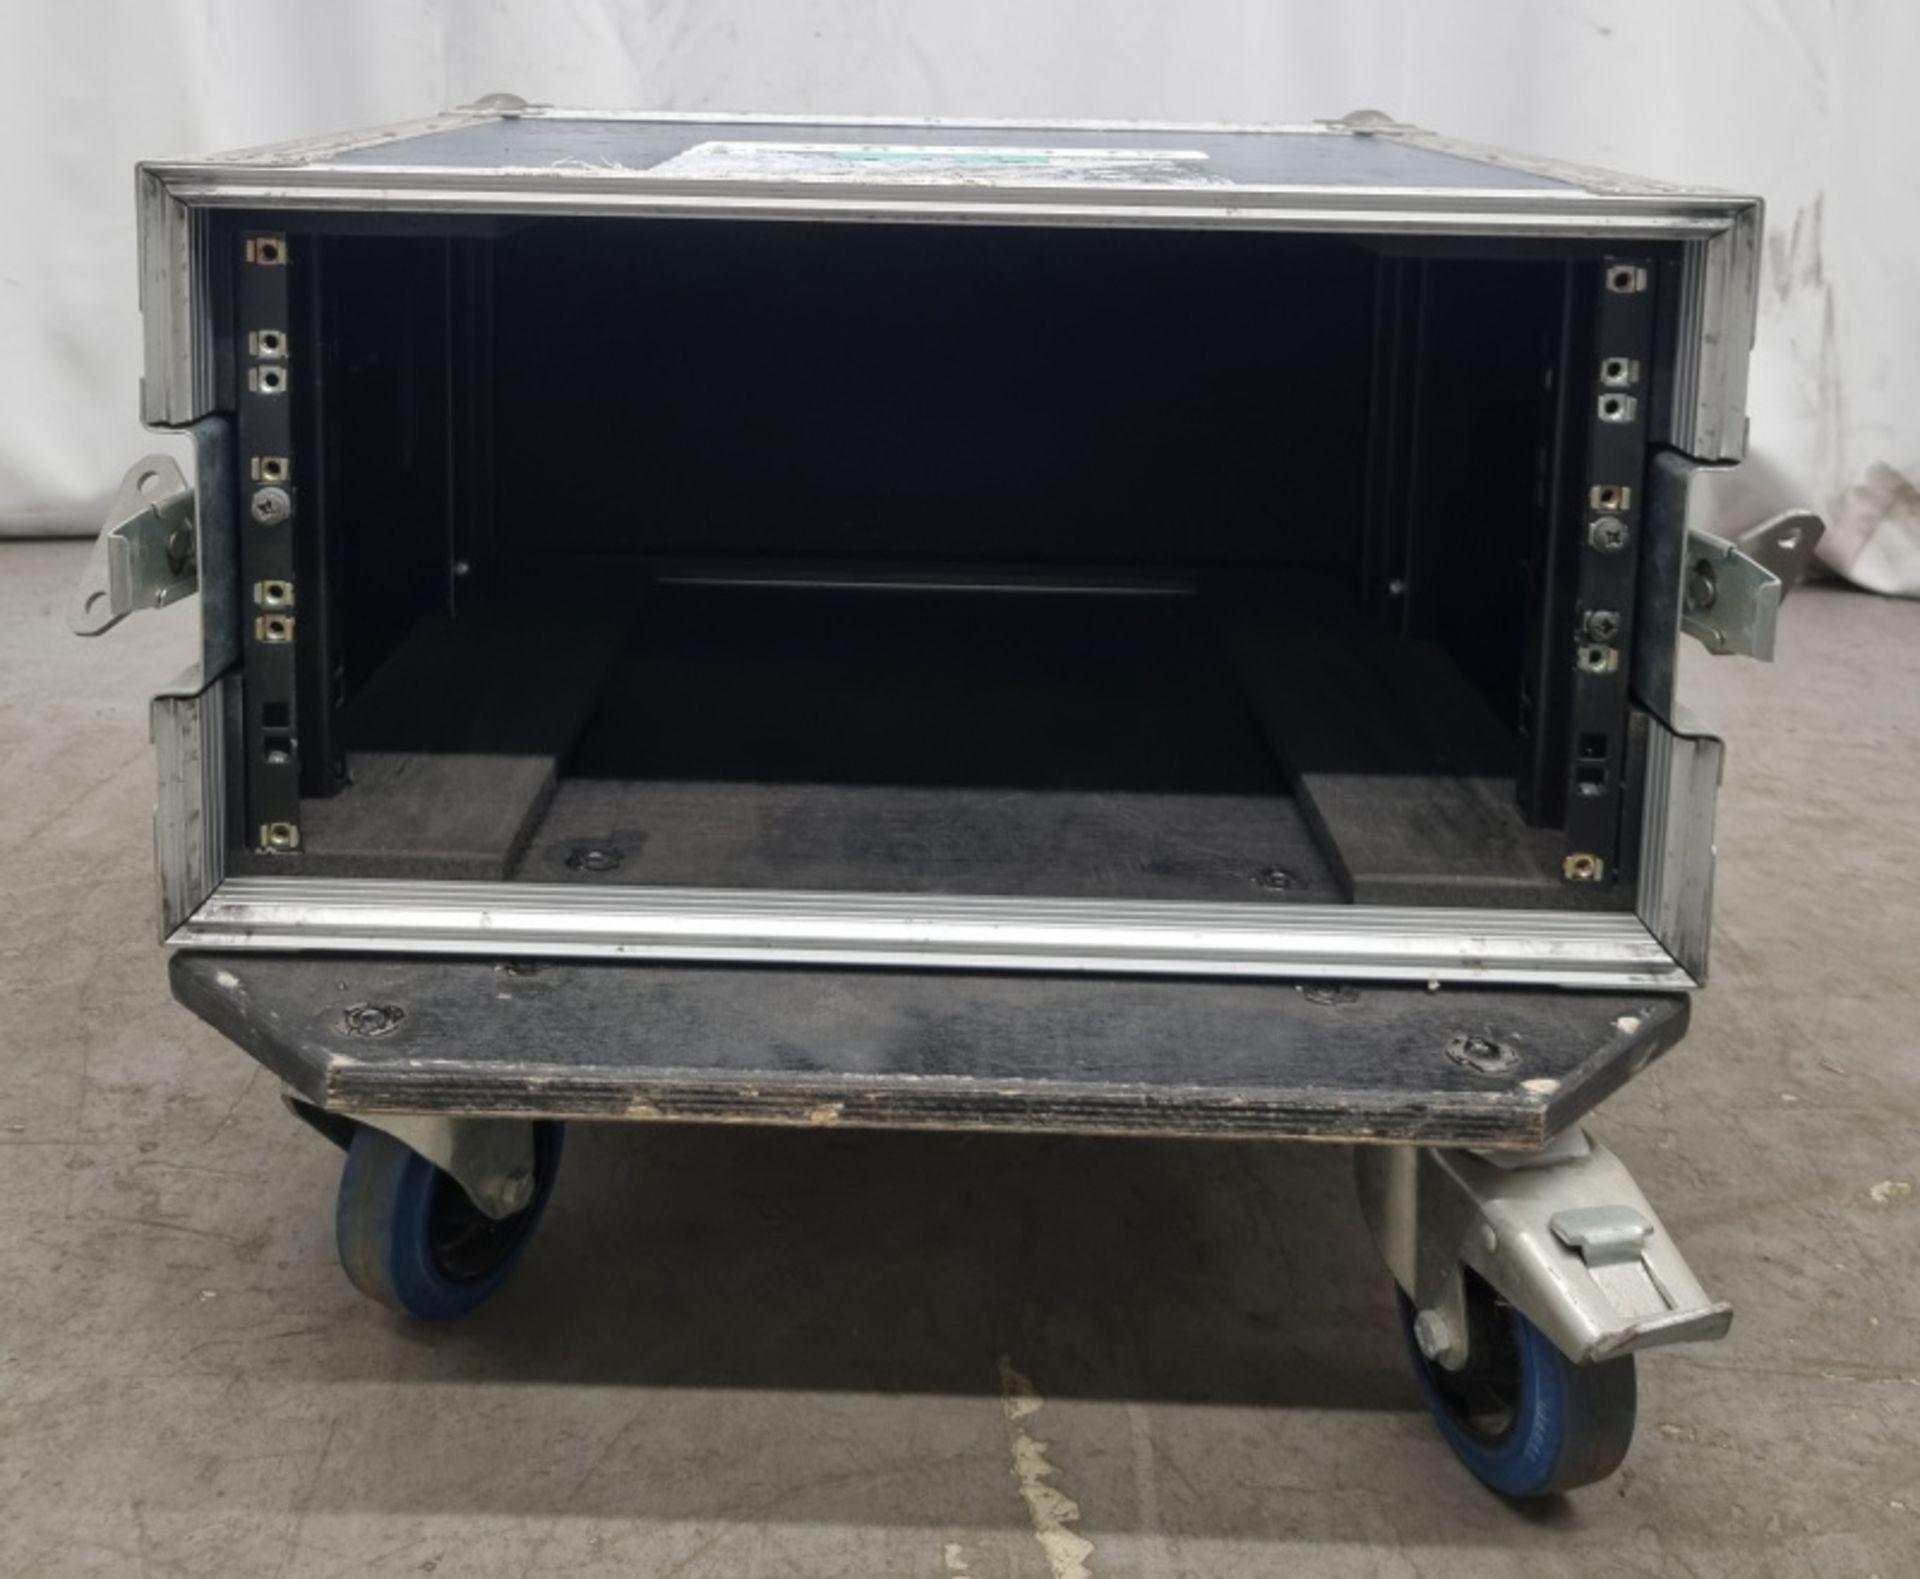 Empty Wheeled Flight case with internal rack - Dimensions L53.5 x W60 x H43cm (including wheels) - Image 4 of 5